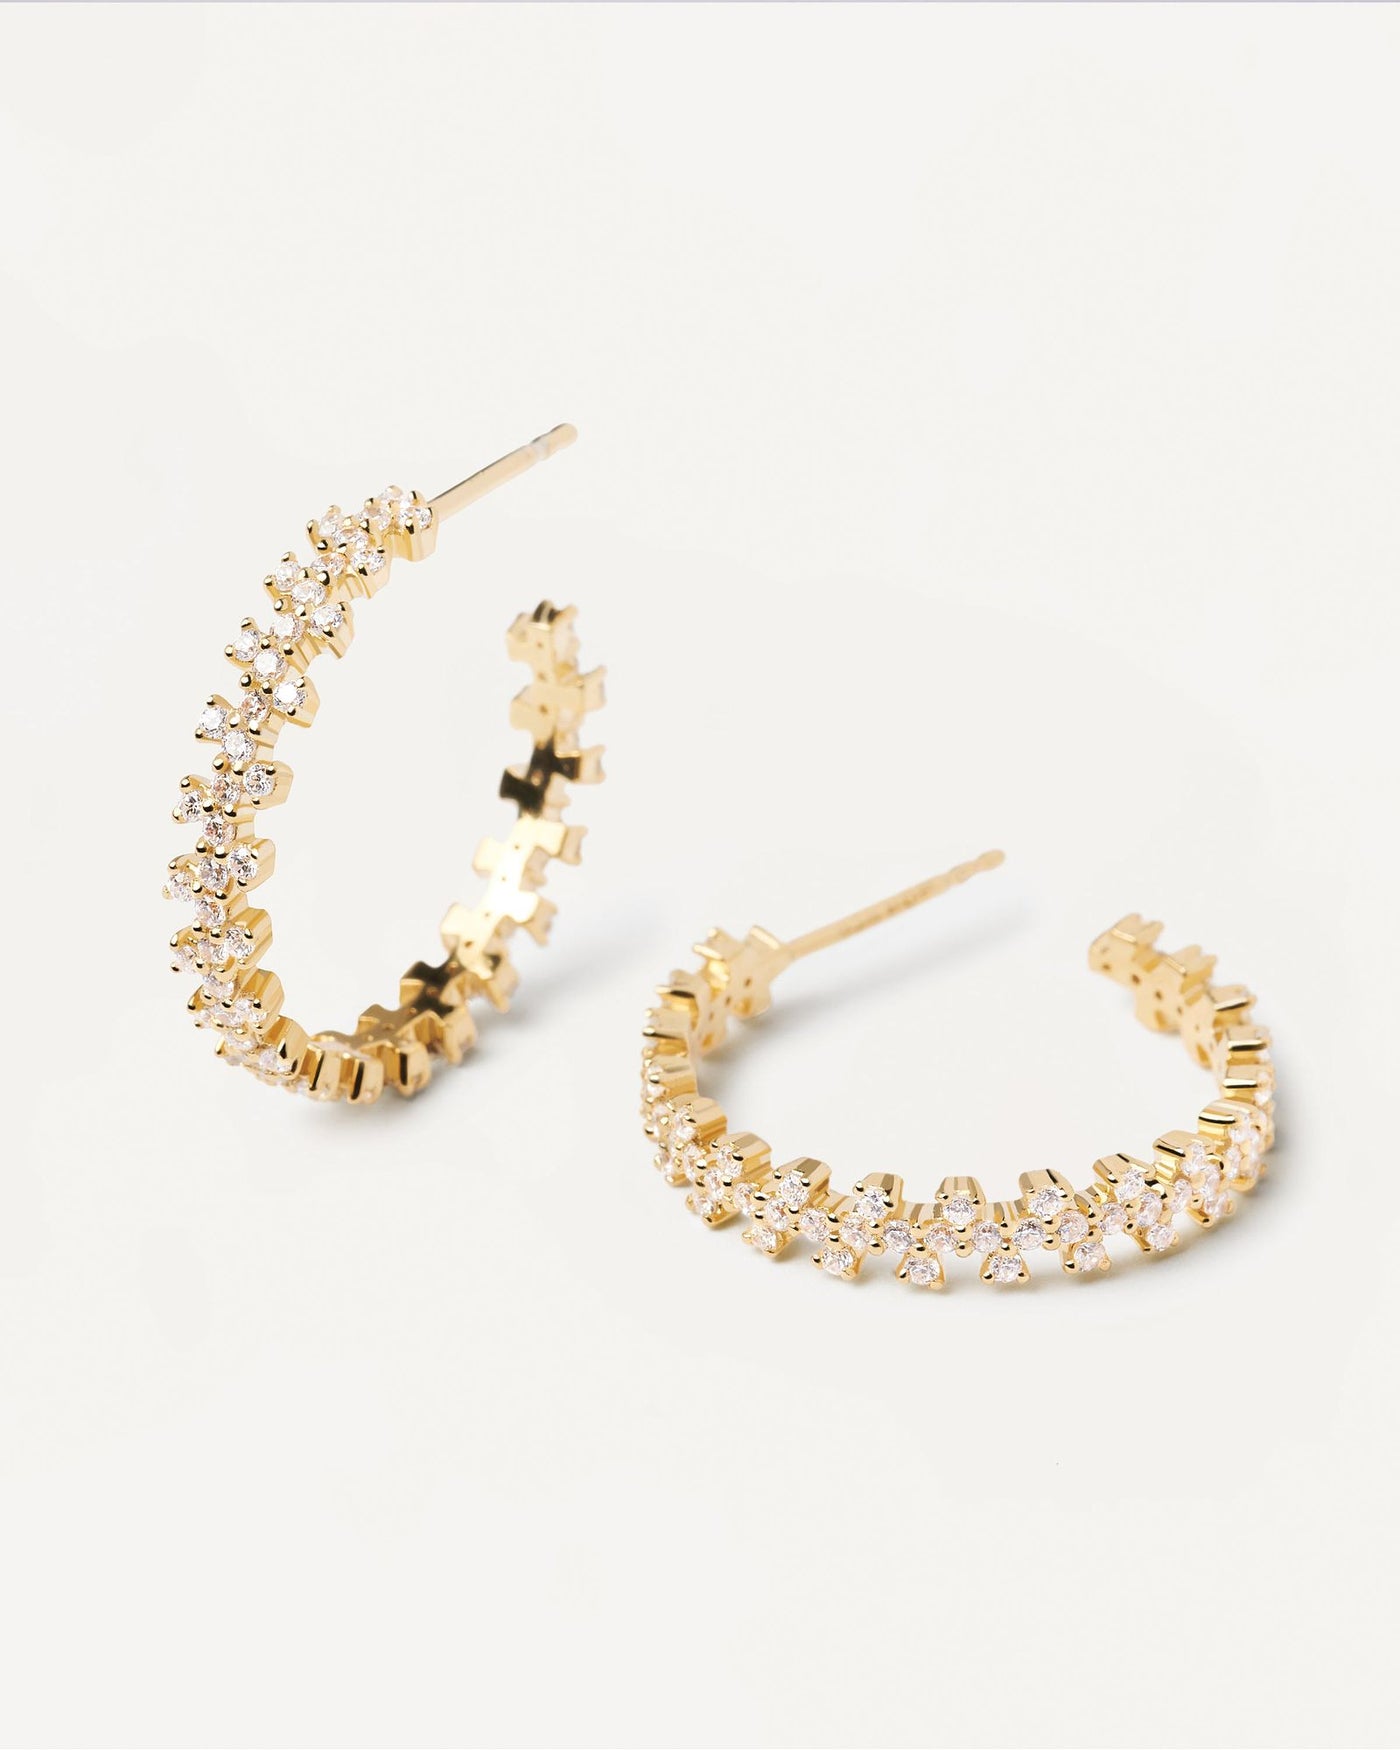 2024 Selection | Crown Earrings. Gold-plated hoop earrings with white zirconia. Get the latest arrival from PDPAOLA. Place your order safely and get this Best Seller. Free Shipping.